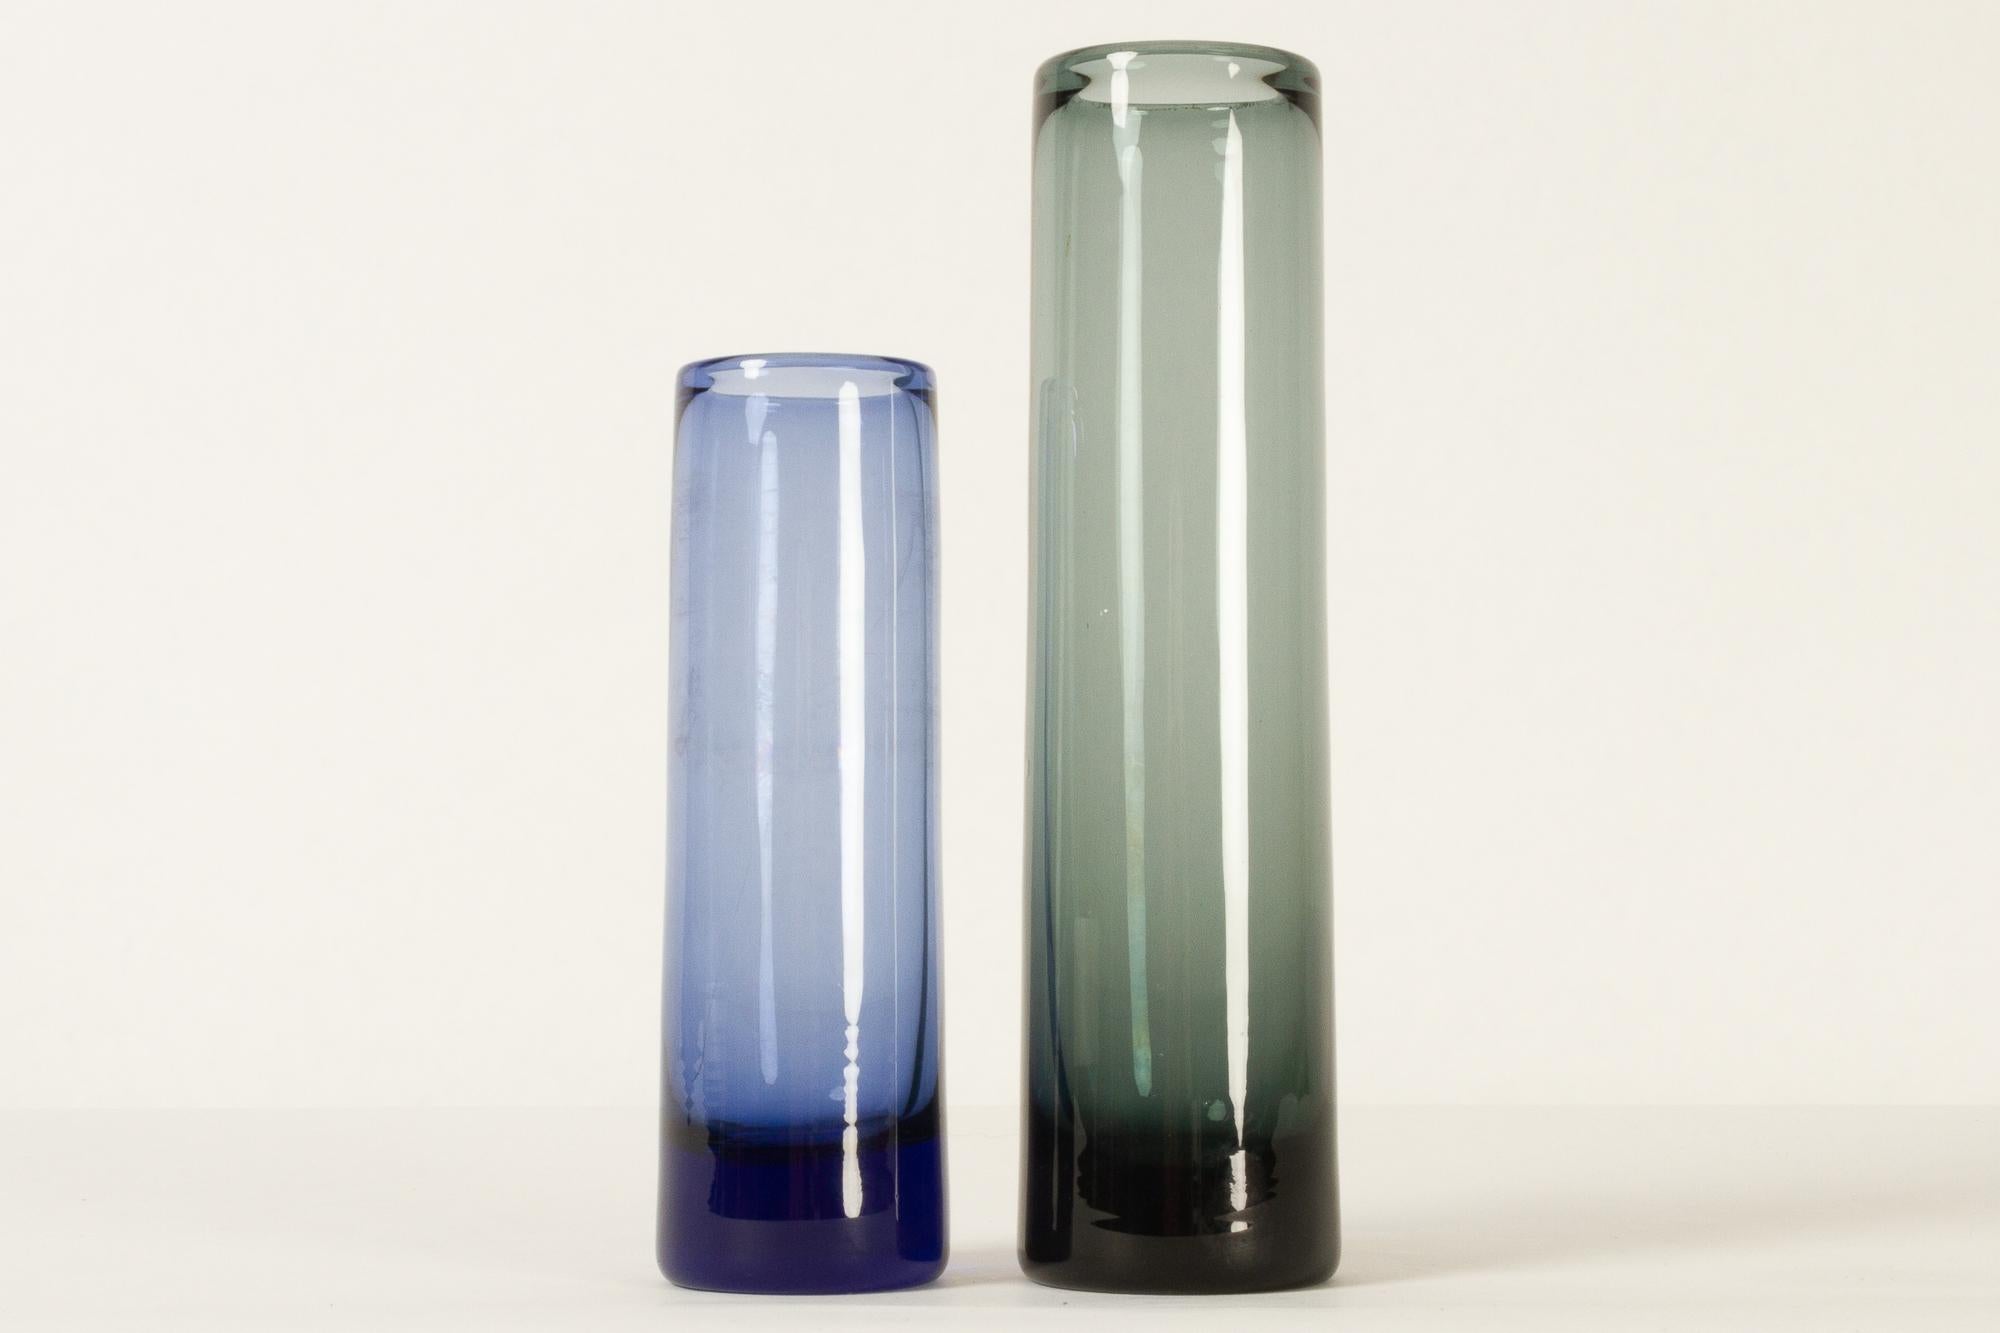 Danish vintage glass vases by Per Lütken for Holmegaard 1950s.
Pair of small torpedo shaped vintage vases in hand blown aqua blue and green glass designed by Danish designer Per Lütken in 1958. Model name 